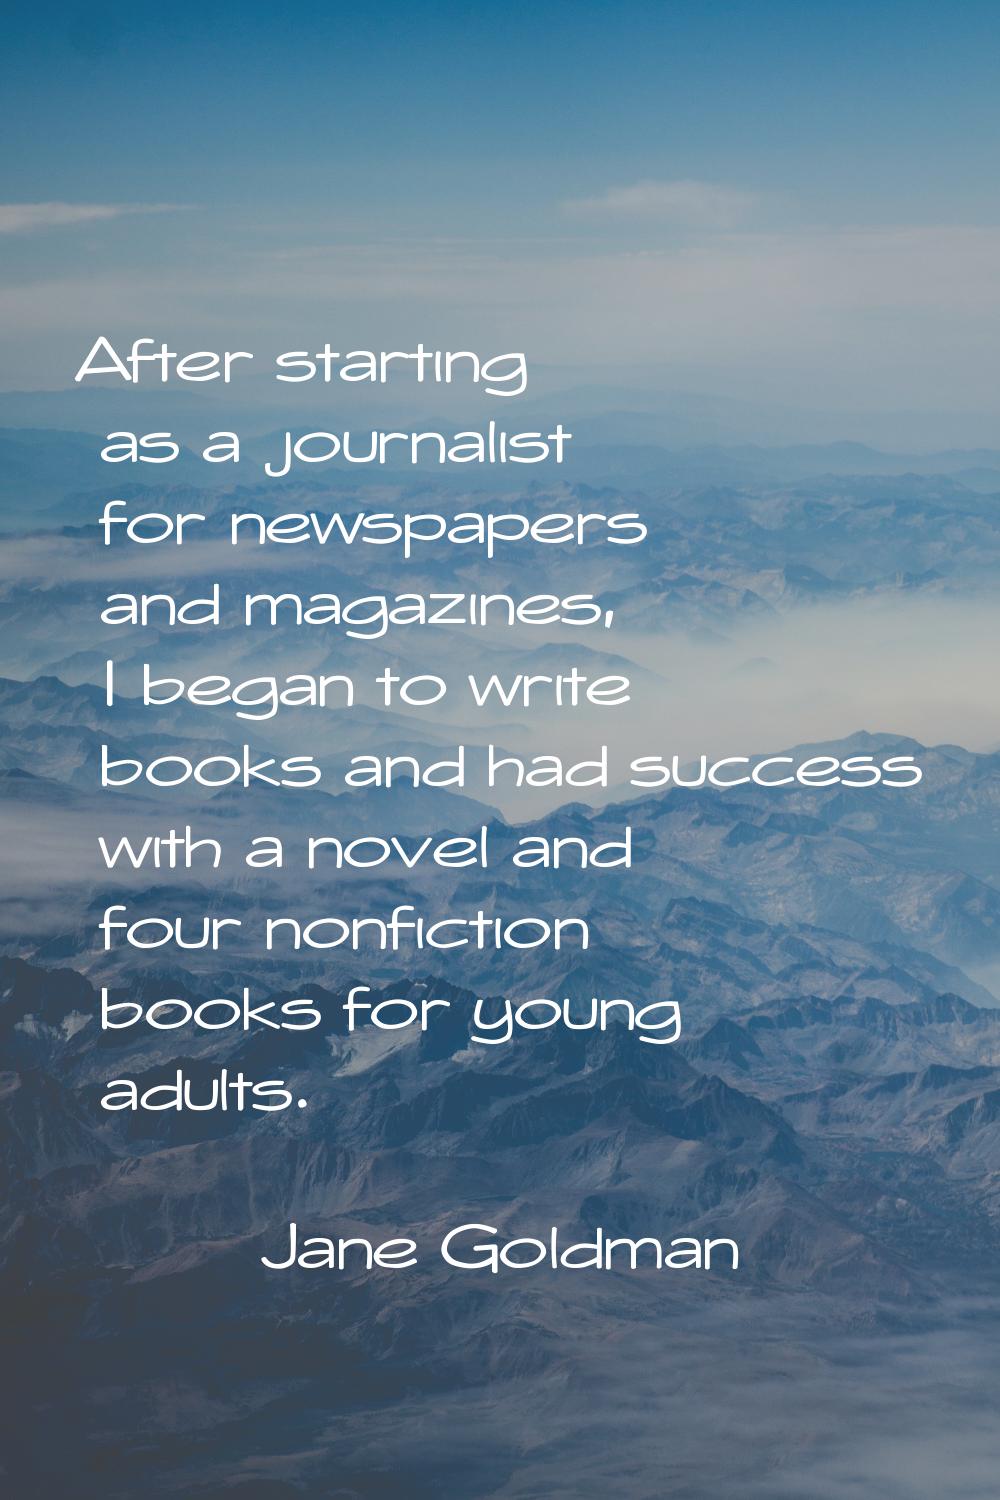 After starting as a journalist for newspapers and magazines, I began to write books and had success